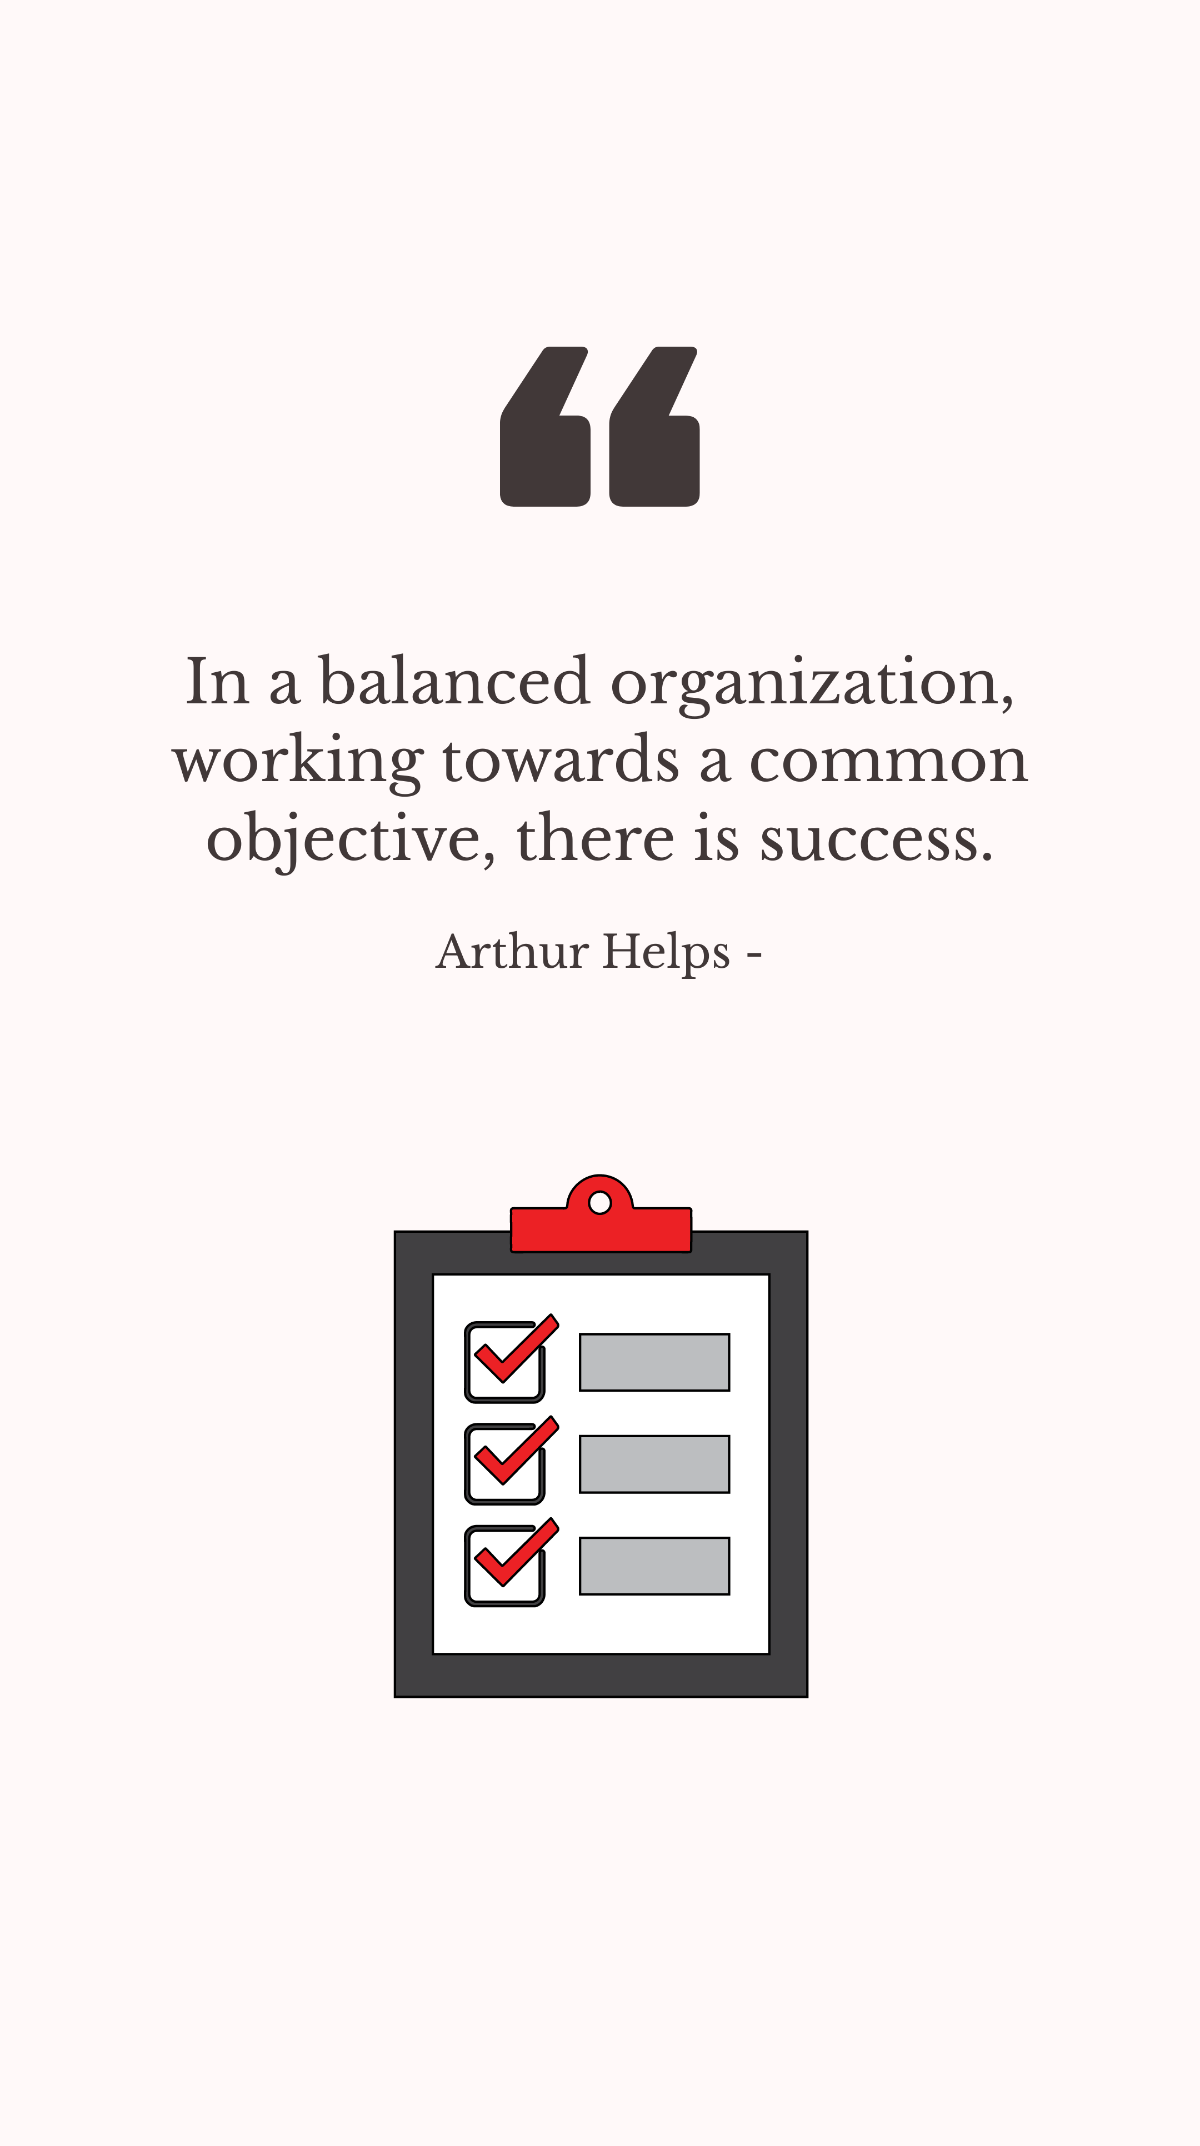 Arthur Helps - In a balanced organization, working towards a common objective, there is success.